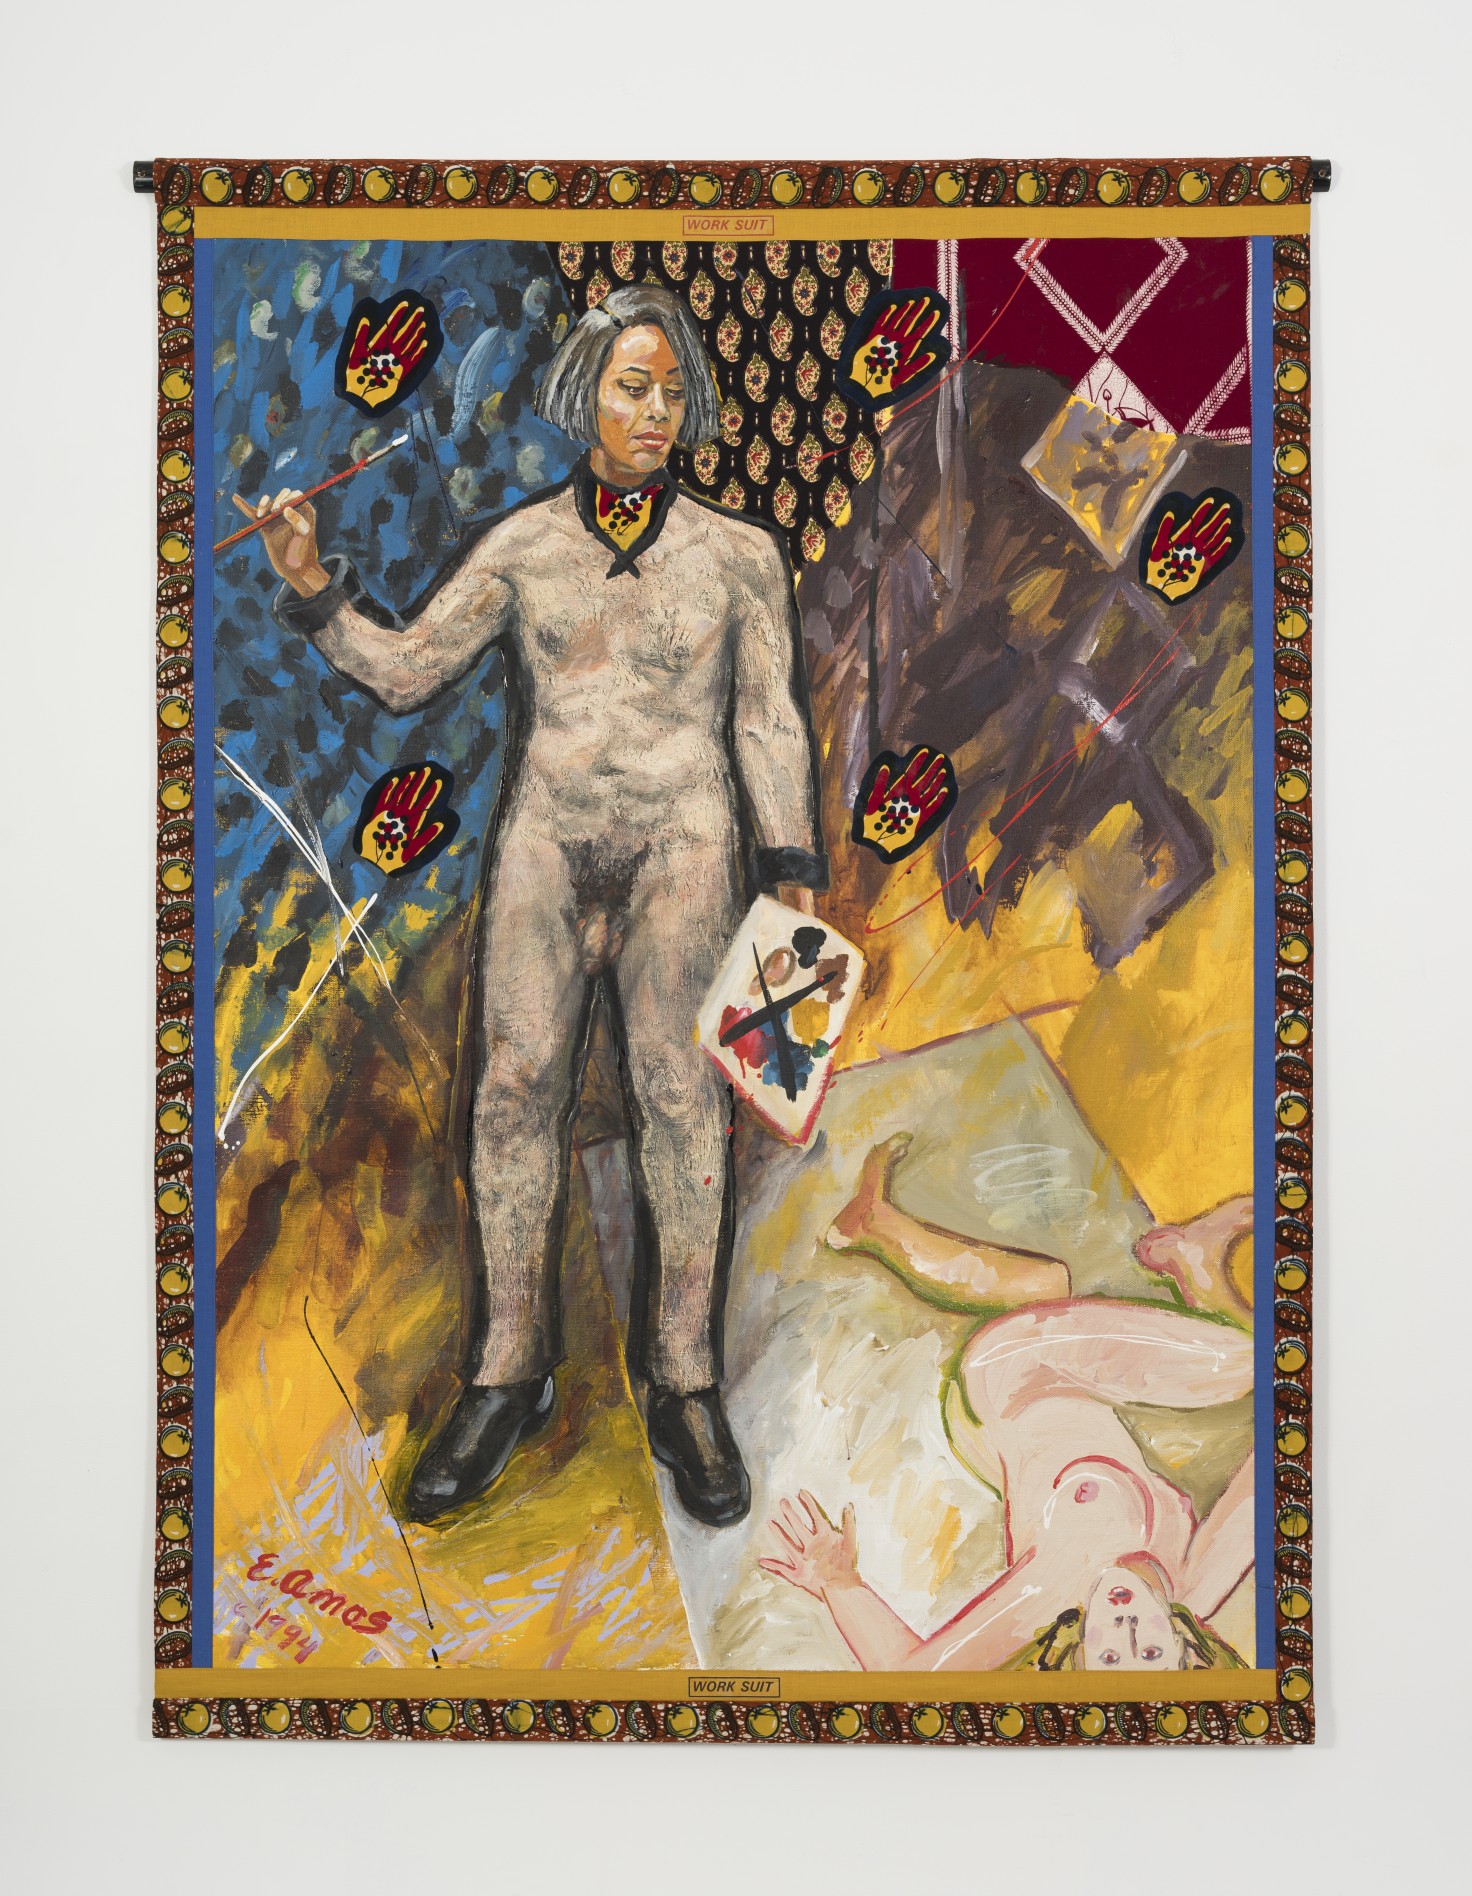 Emma Amos, who is Black, depicts herself wearing a skin-suit of a white person with a penis, while painting a nude white person laying on the ground.